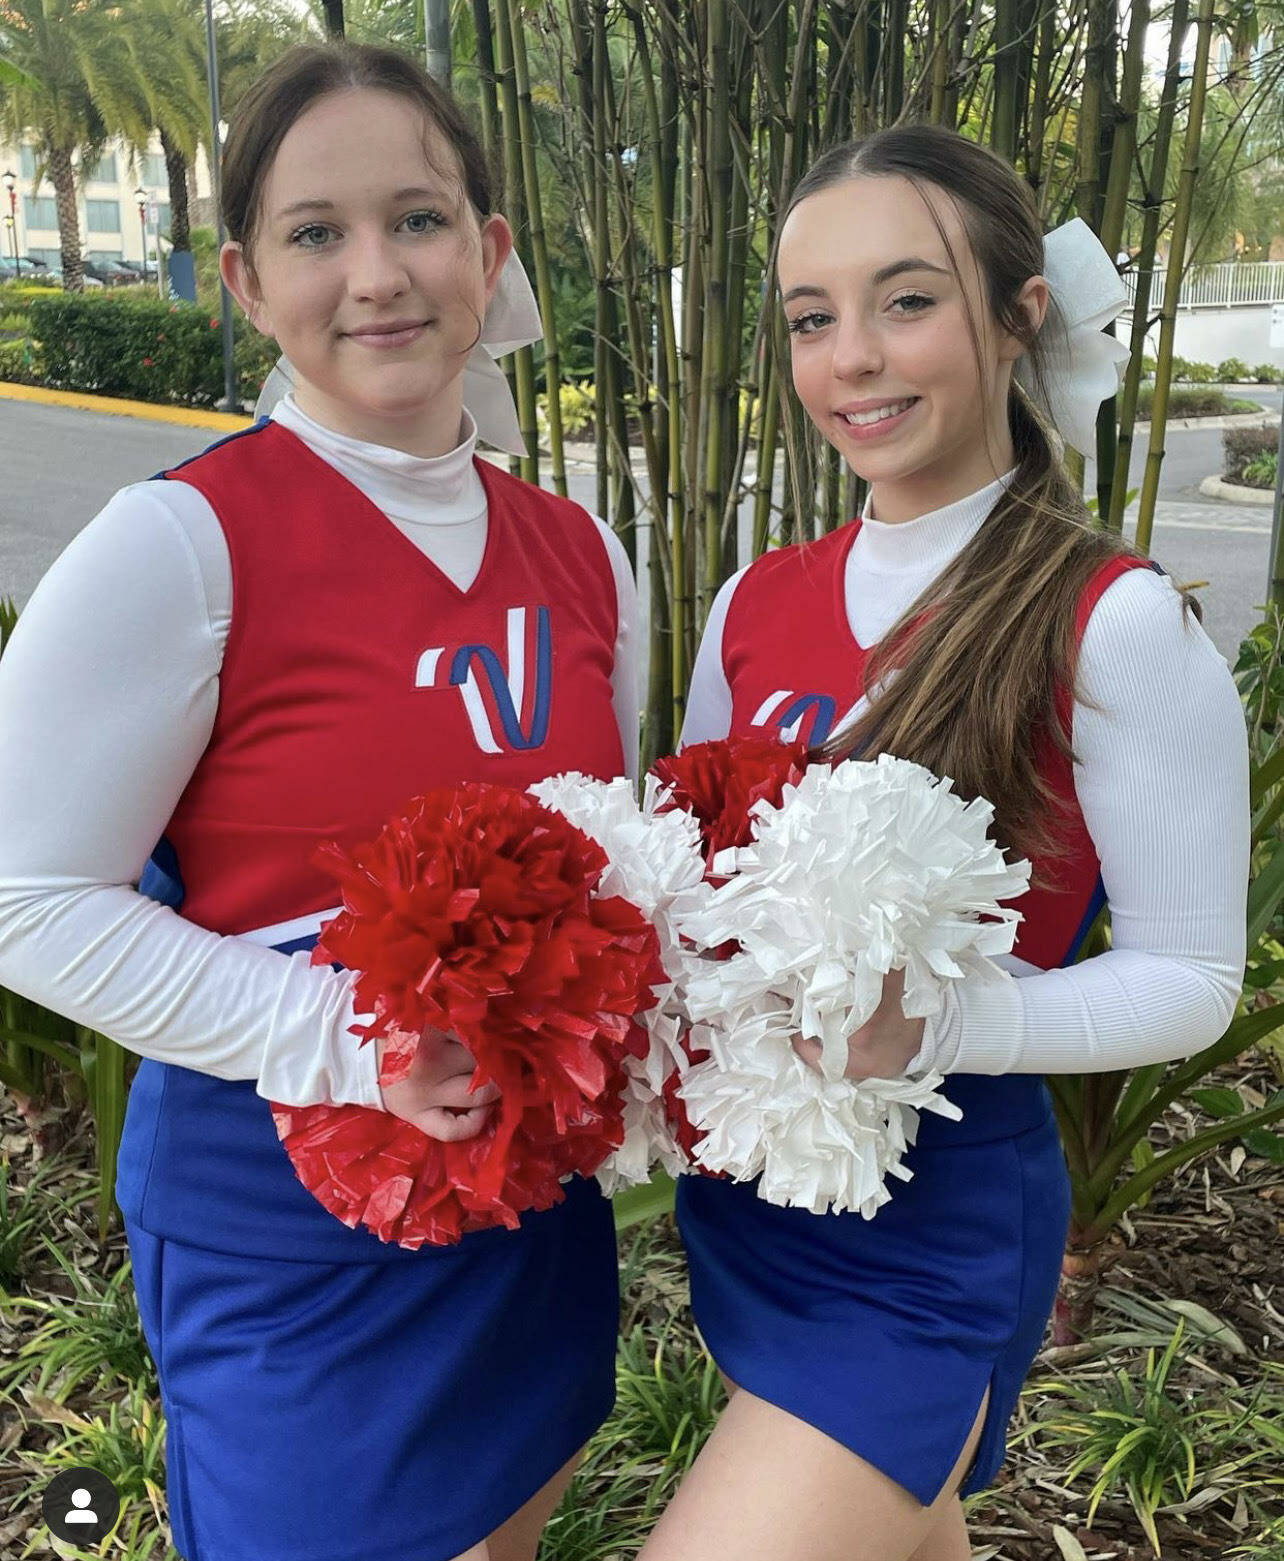 Photo provided
Cassidy Gore, left, and Ava Vallencourt get ready for their pregame performance at the Citrus Bowl.